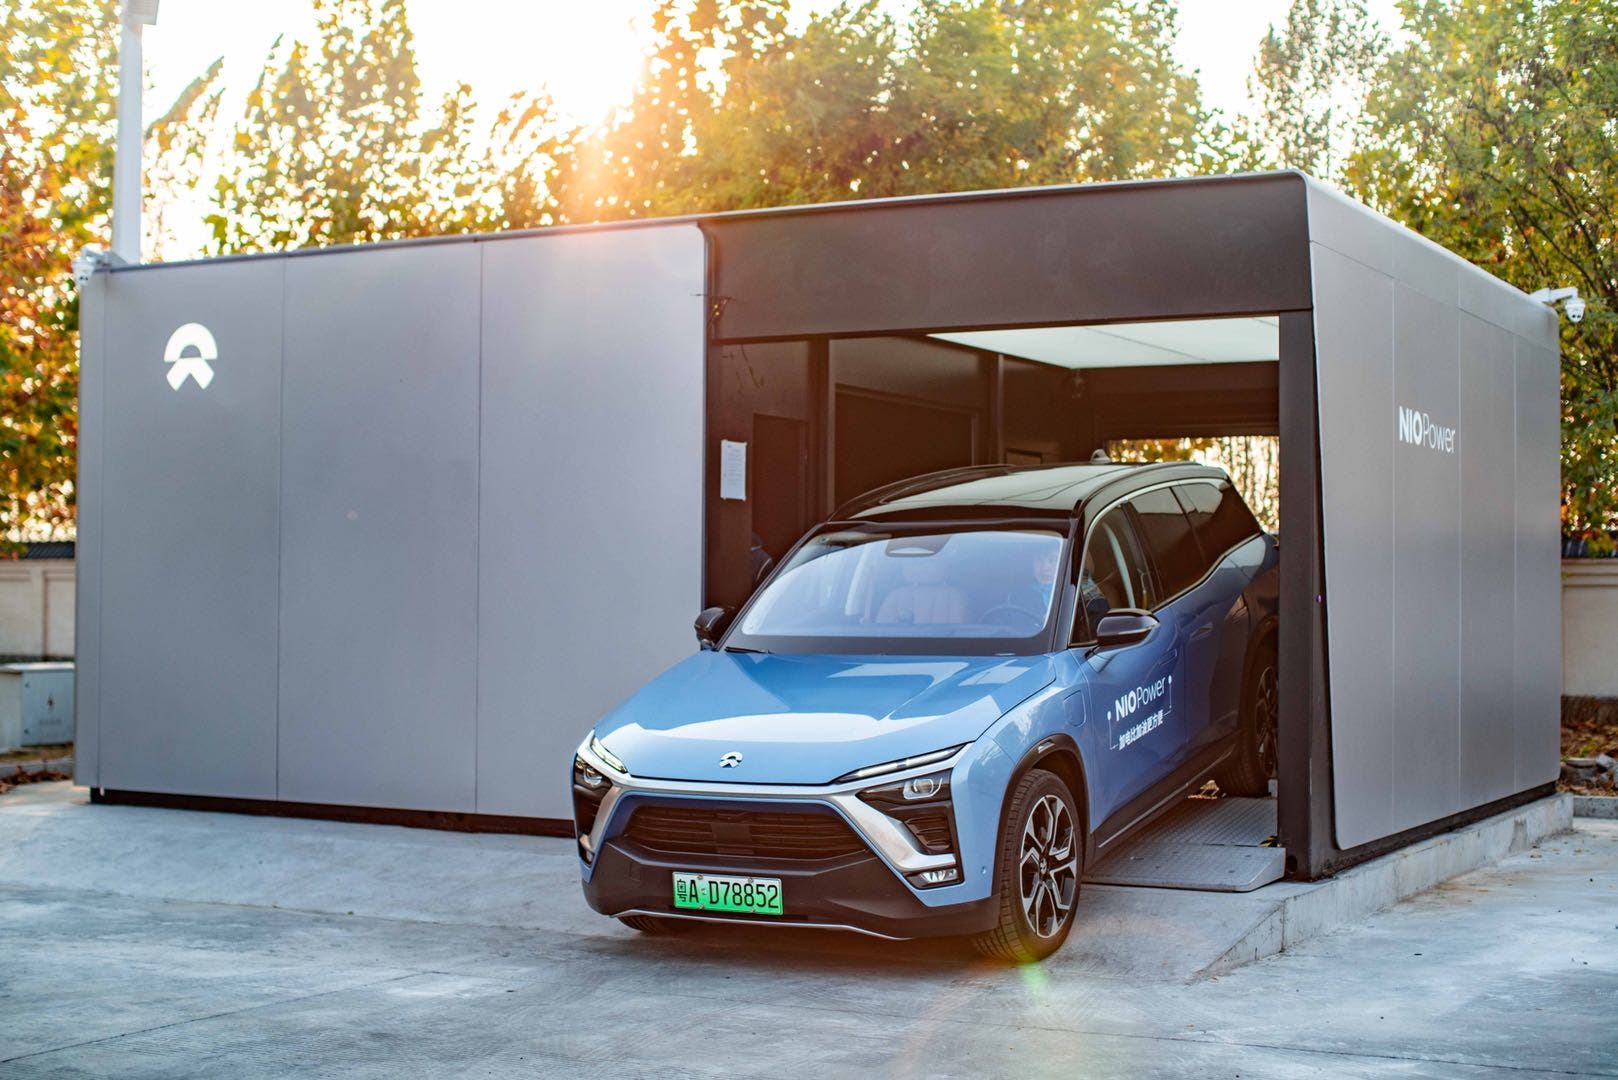 NIO Power battery swapping